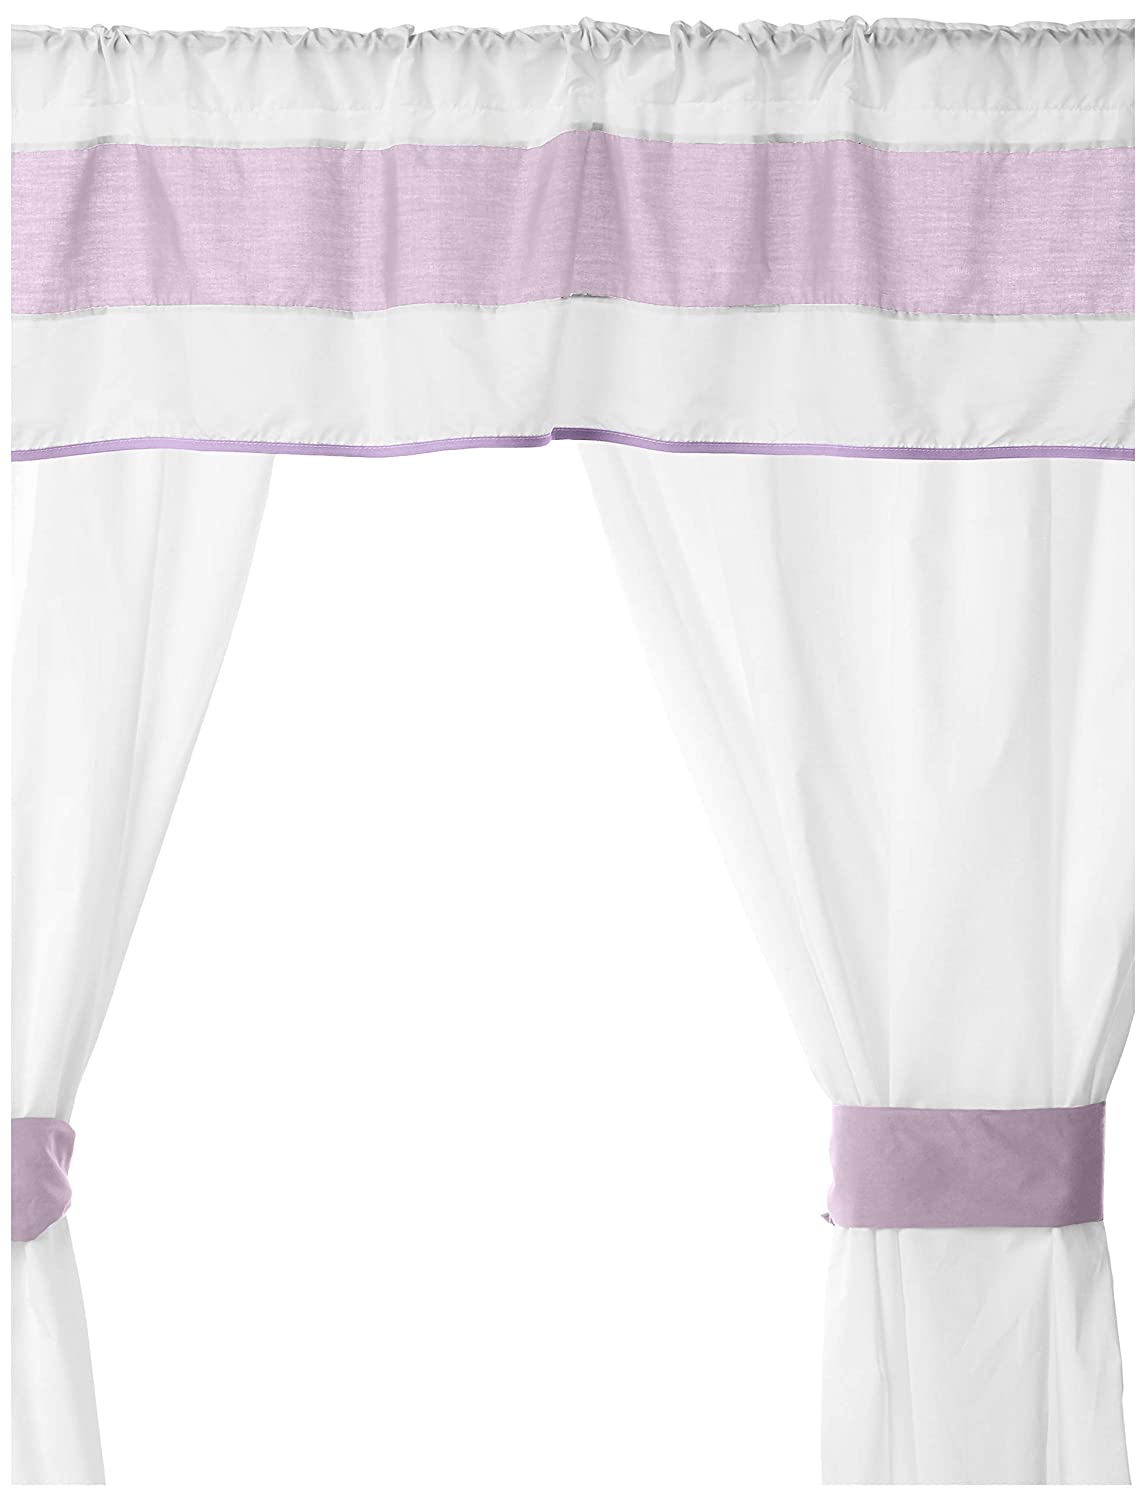 Baby Doll Lodge Collection Window Valance & Curtain Set, Lavender